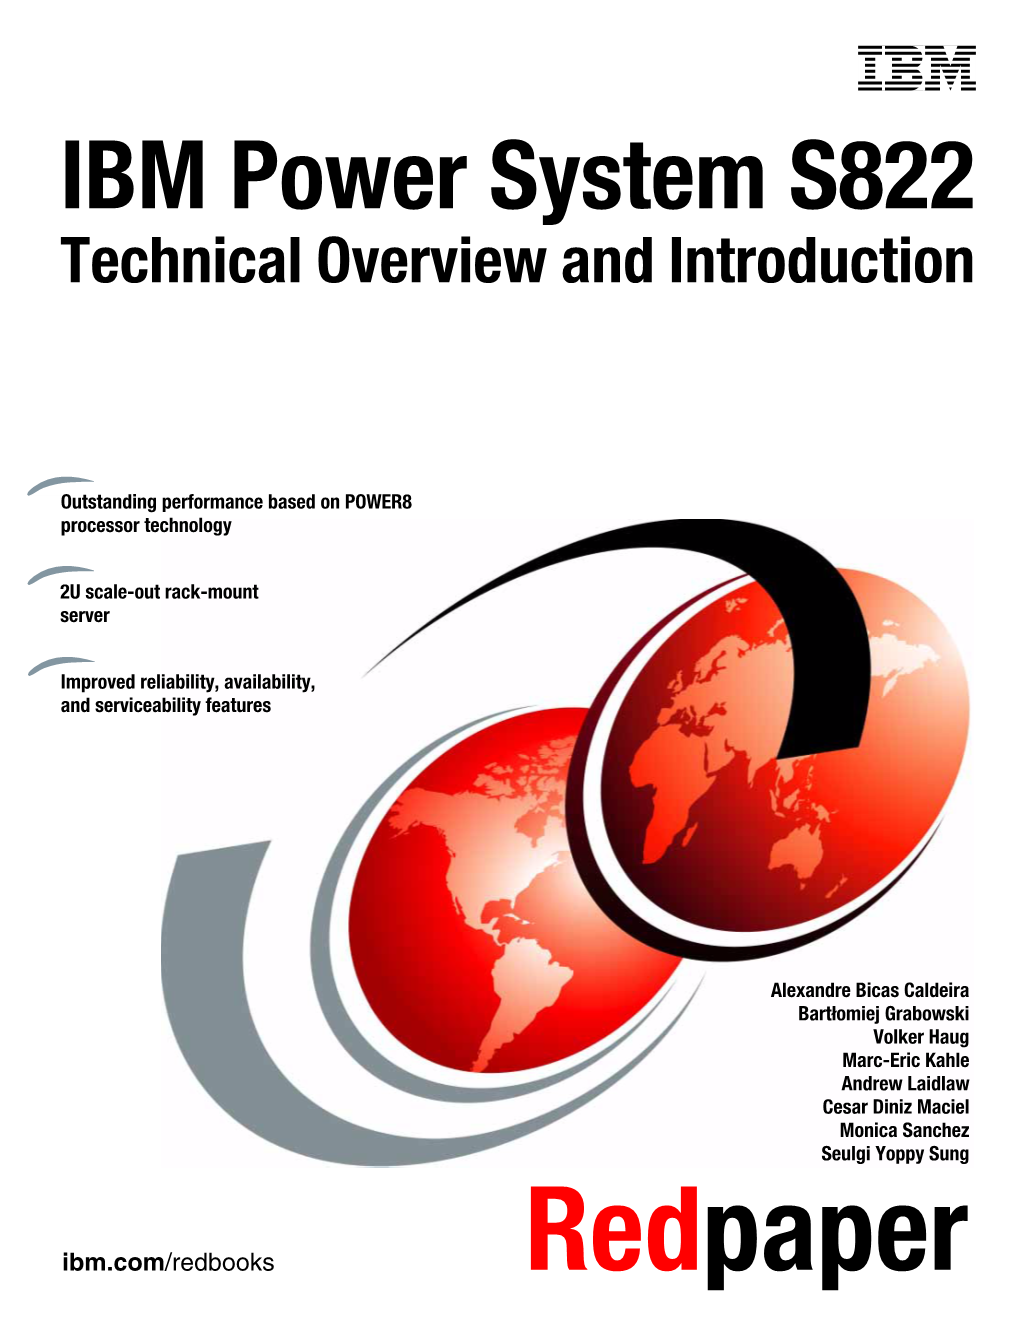 IBM Power System S822: Technical Overview and Introduction